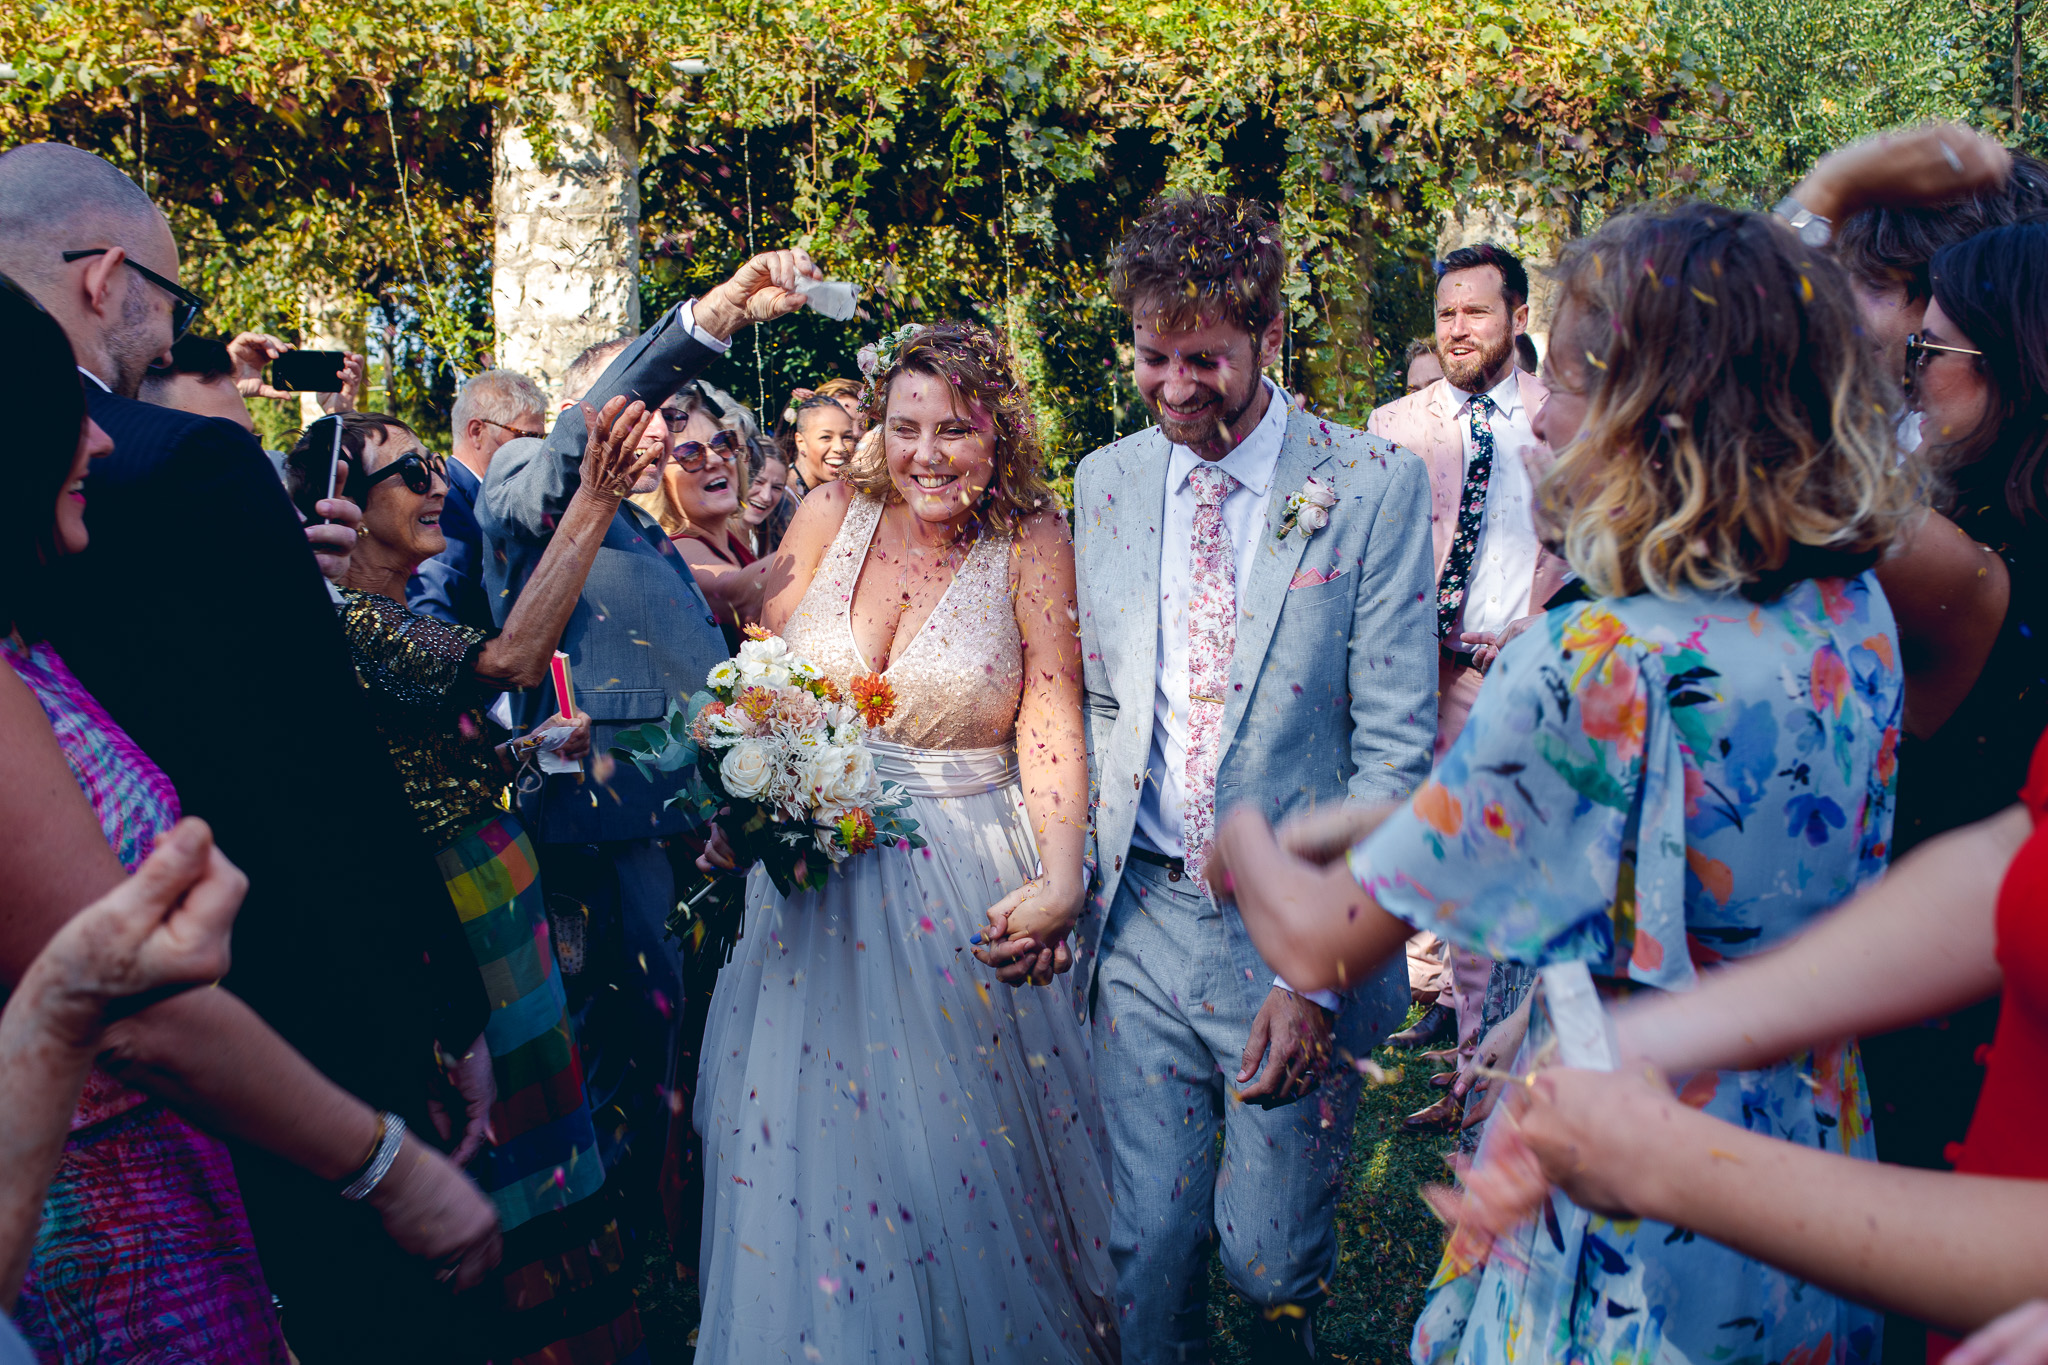 married couple walking through guests who are throwing biodegradable confetti